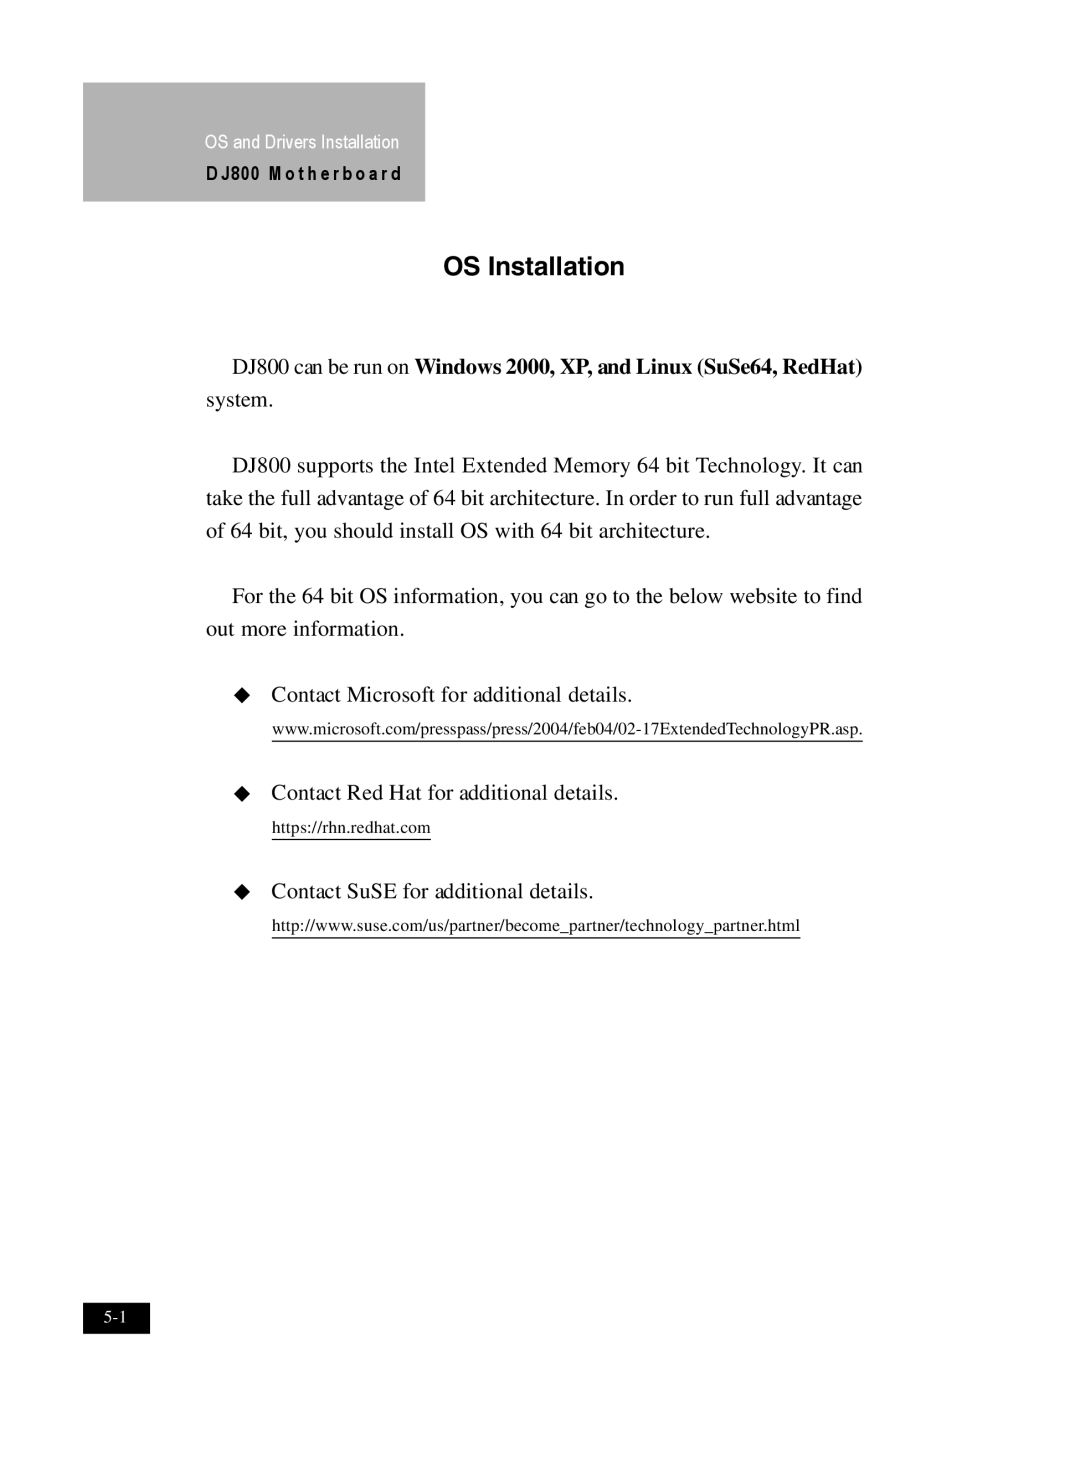 IBM user manual OS Installation, DJ800 can be run on Windows 2000, XP, and Linux SuSe64, RedHat system 